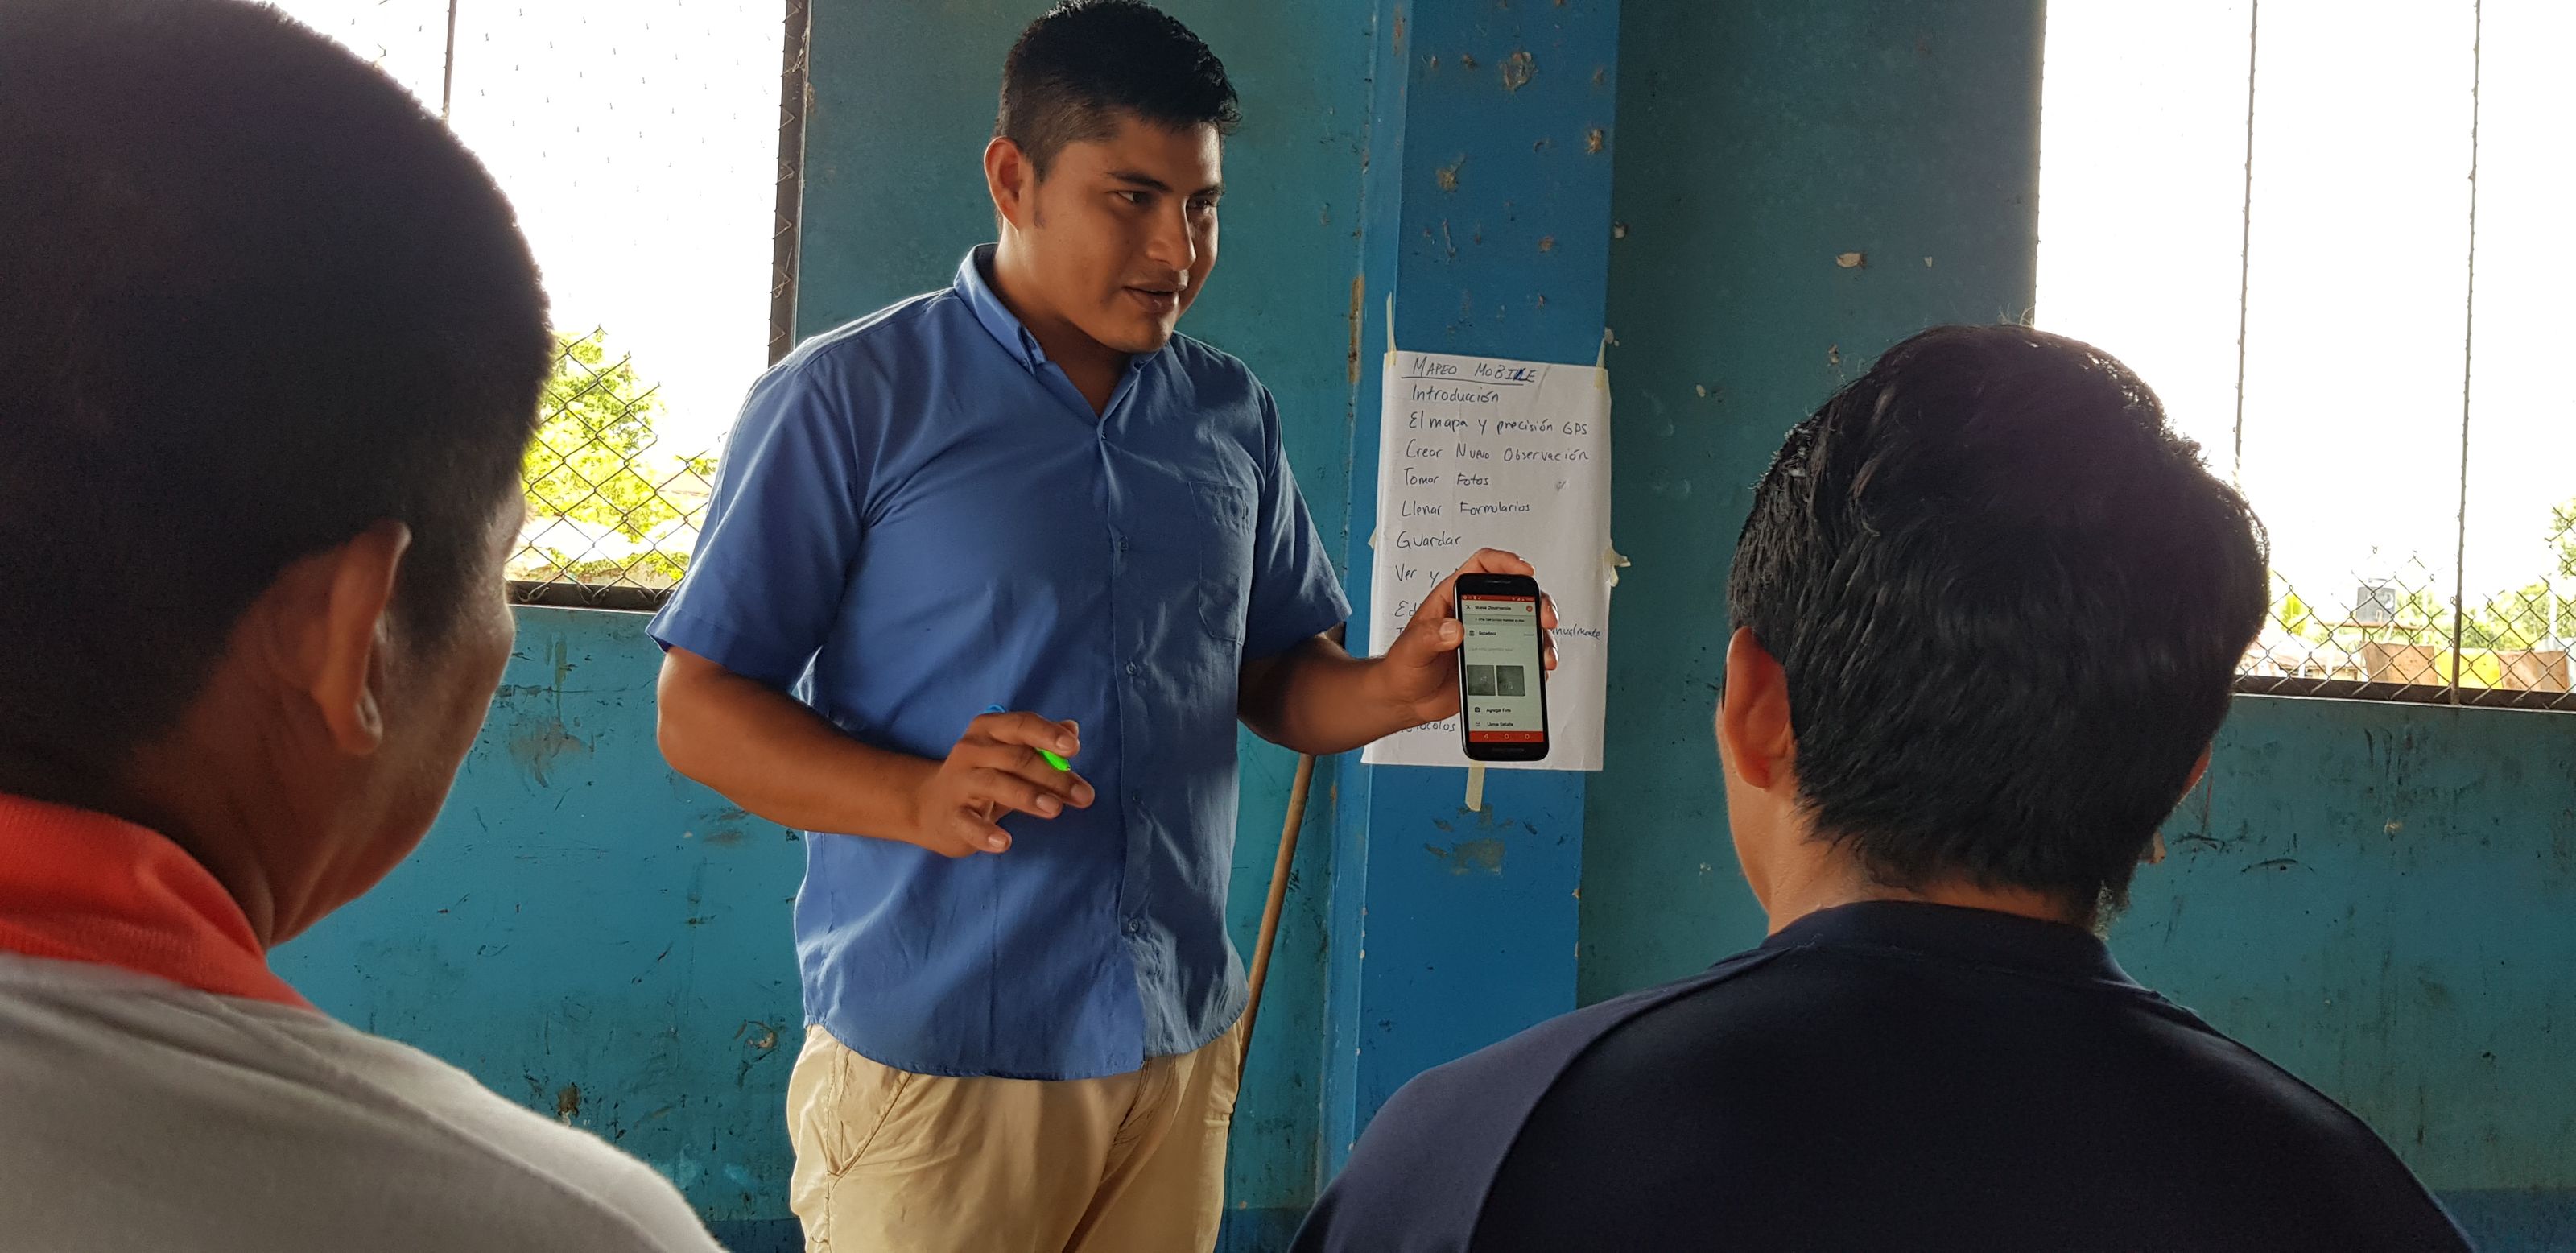 John Garcia Ruiz is one of the community monitor coordinators of the Tigre river basin. Here he is training monitors from other communities on using MAPEO Mobile for collecting evidence of oil contamination.